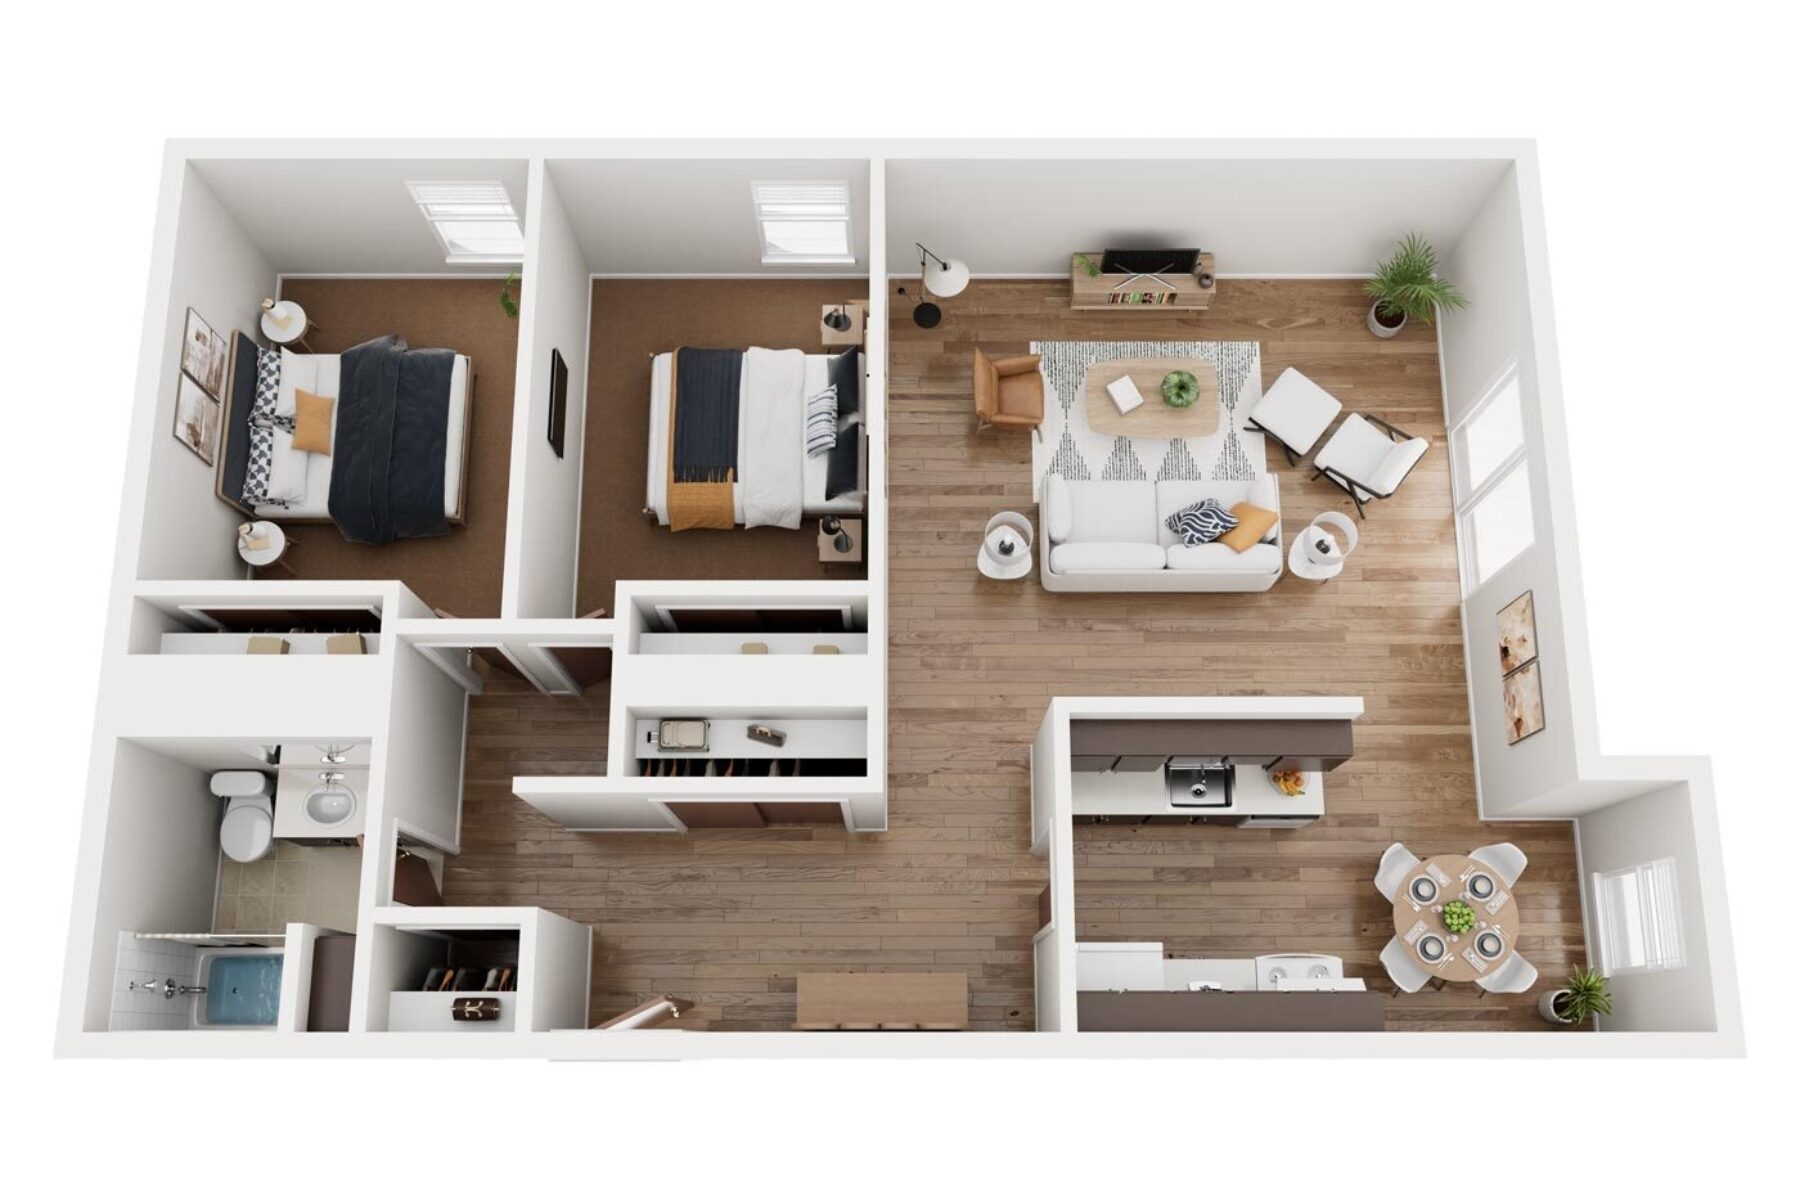 Plan Image: C1 Two Bedroom